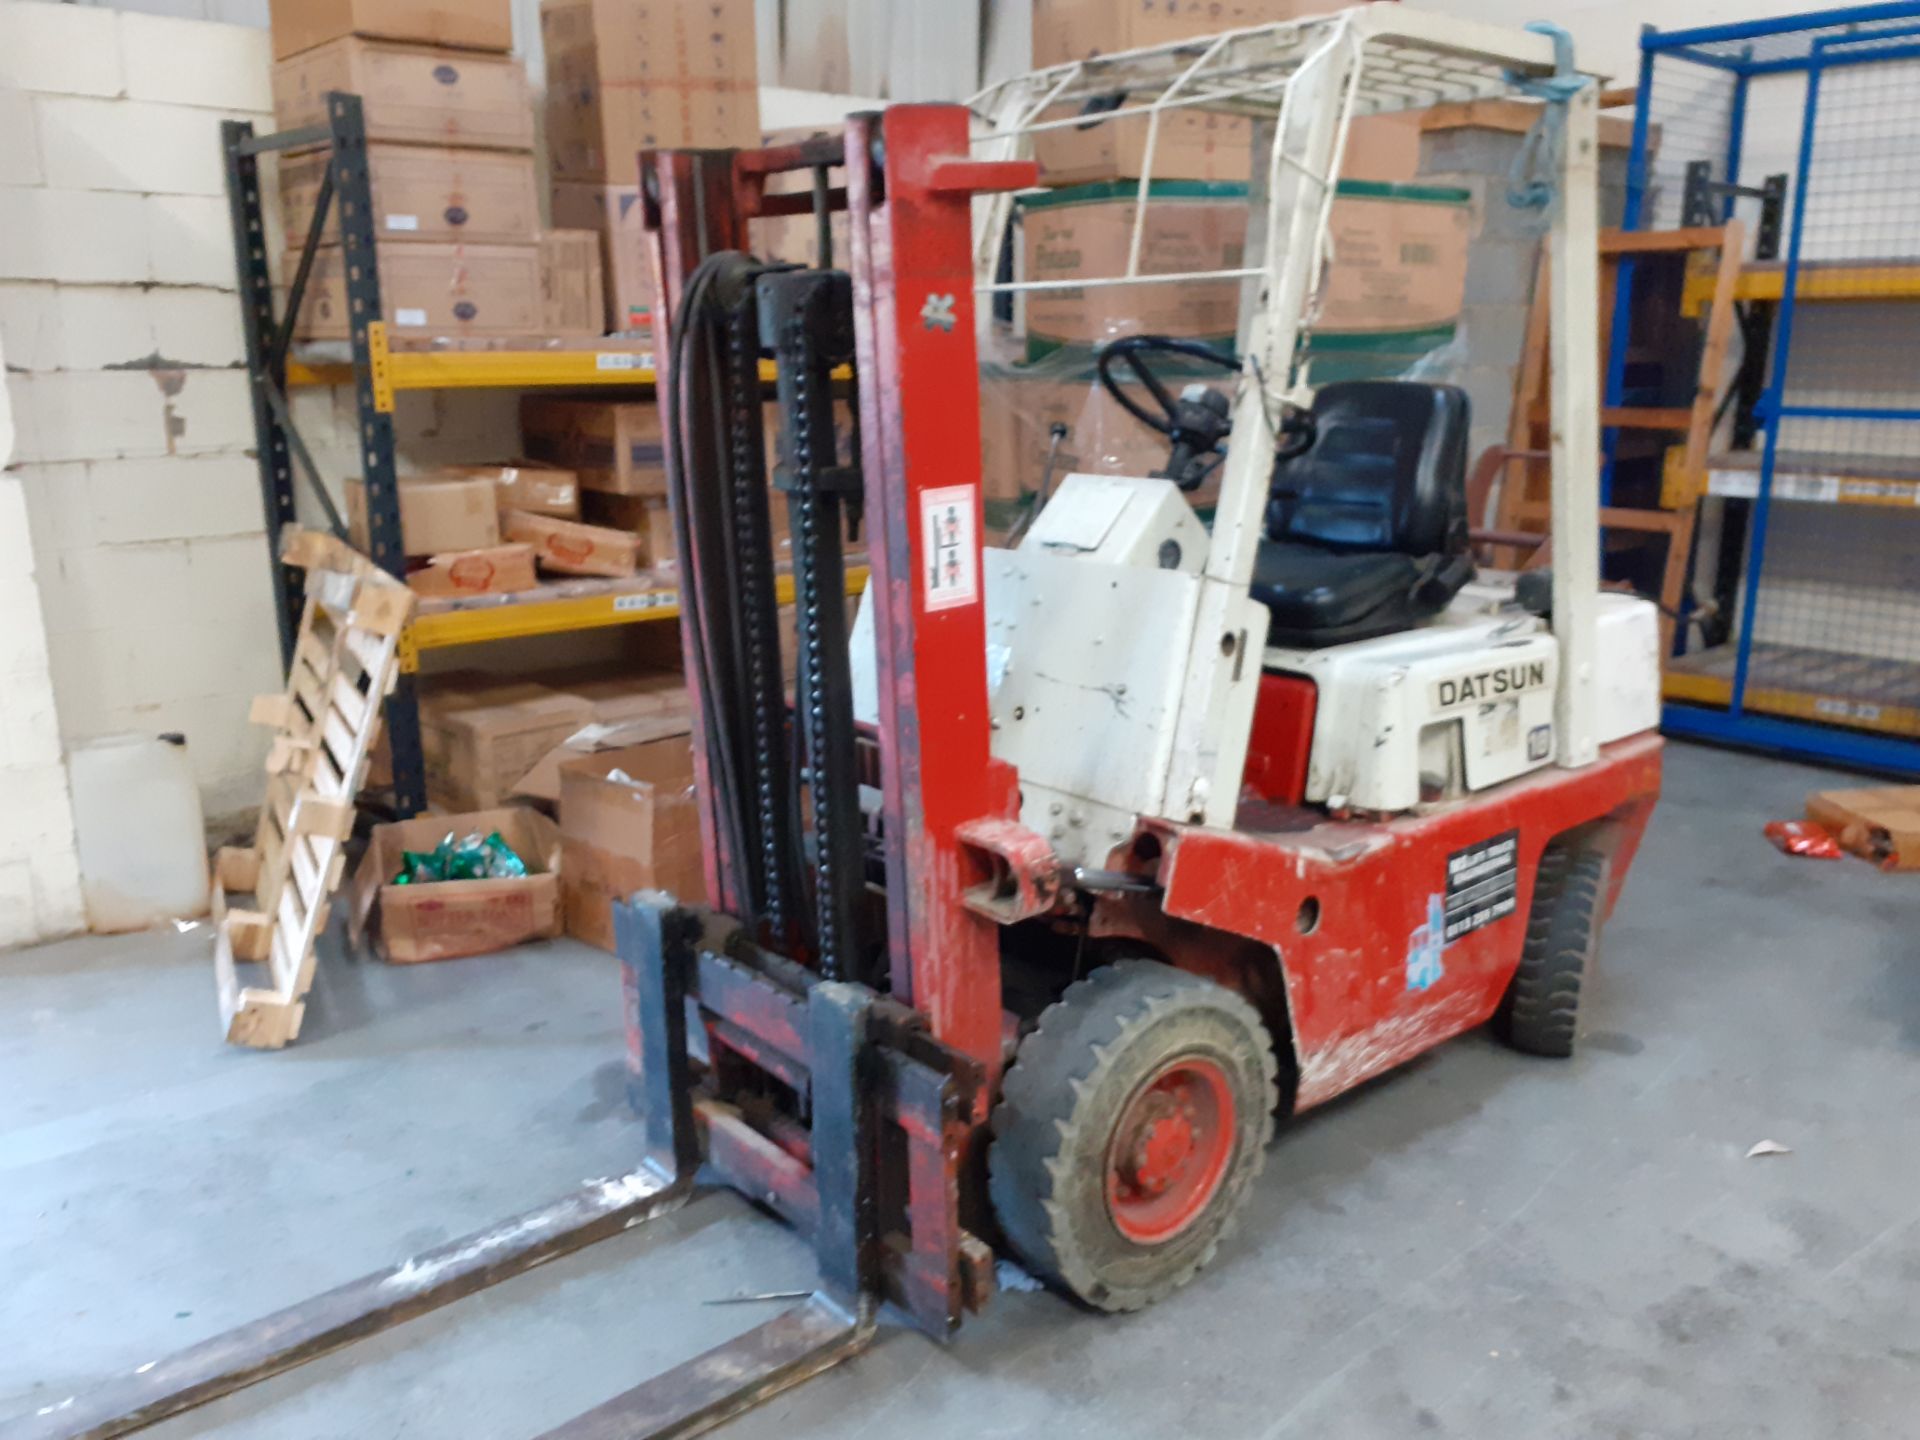 Datsun 1.8 Forklift truck gas. Short mast Designed to go inside containers Lift height approx 2m - Image 2 of 2